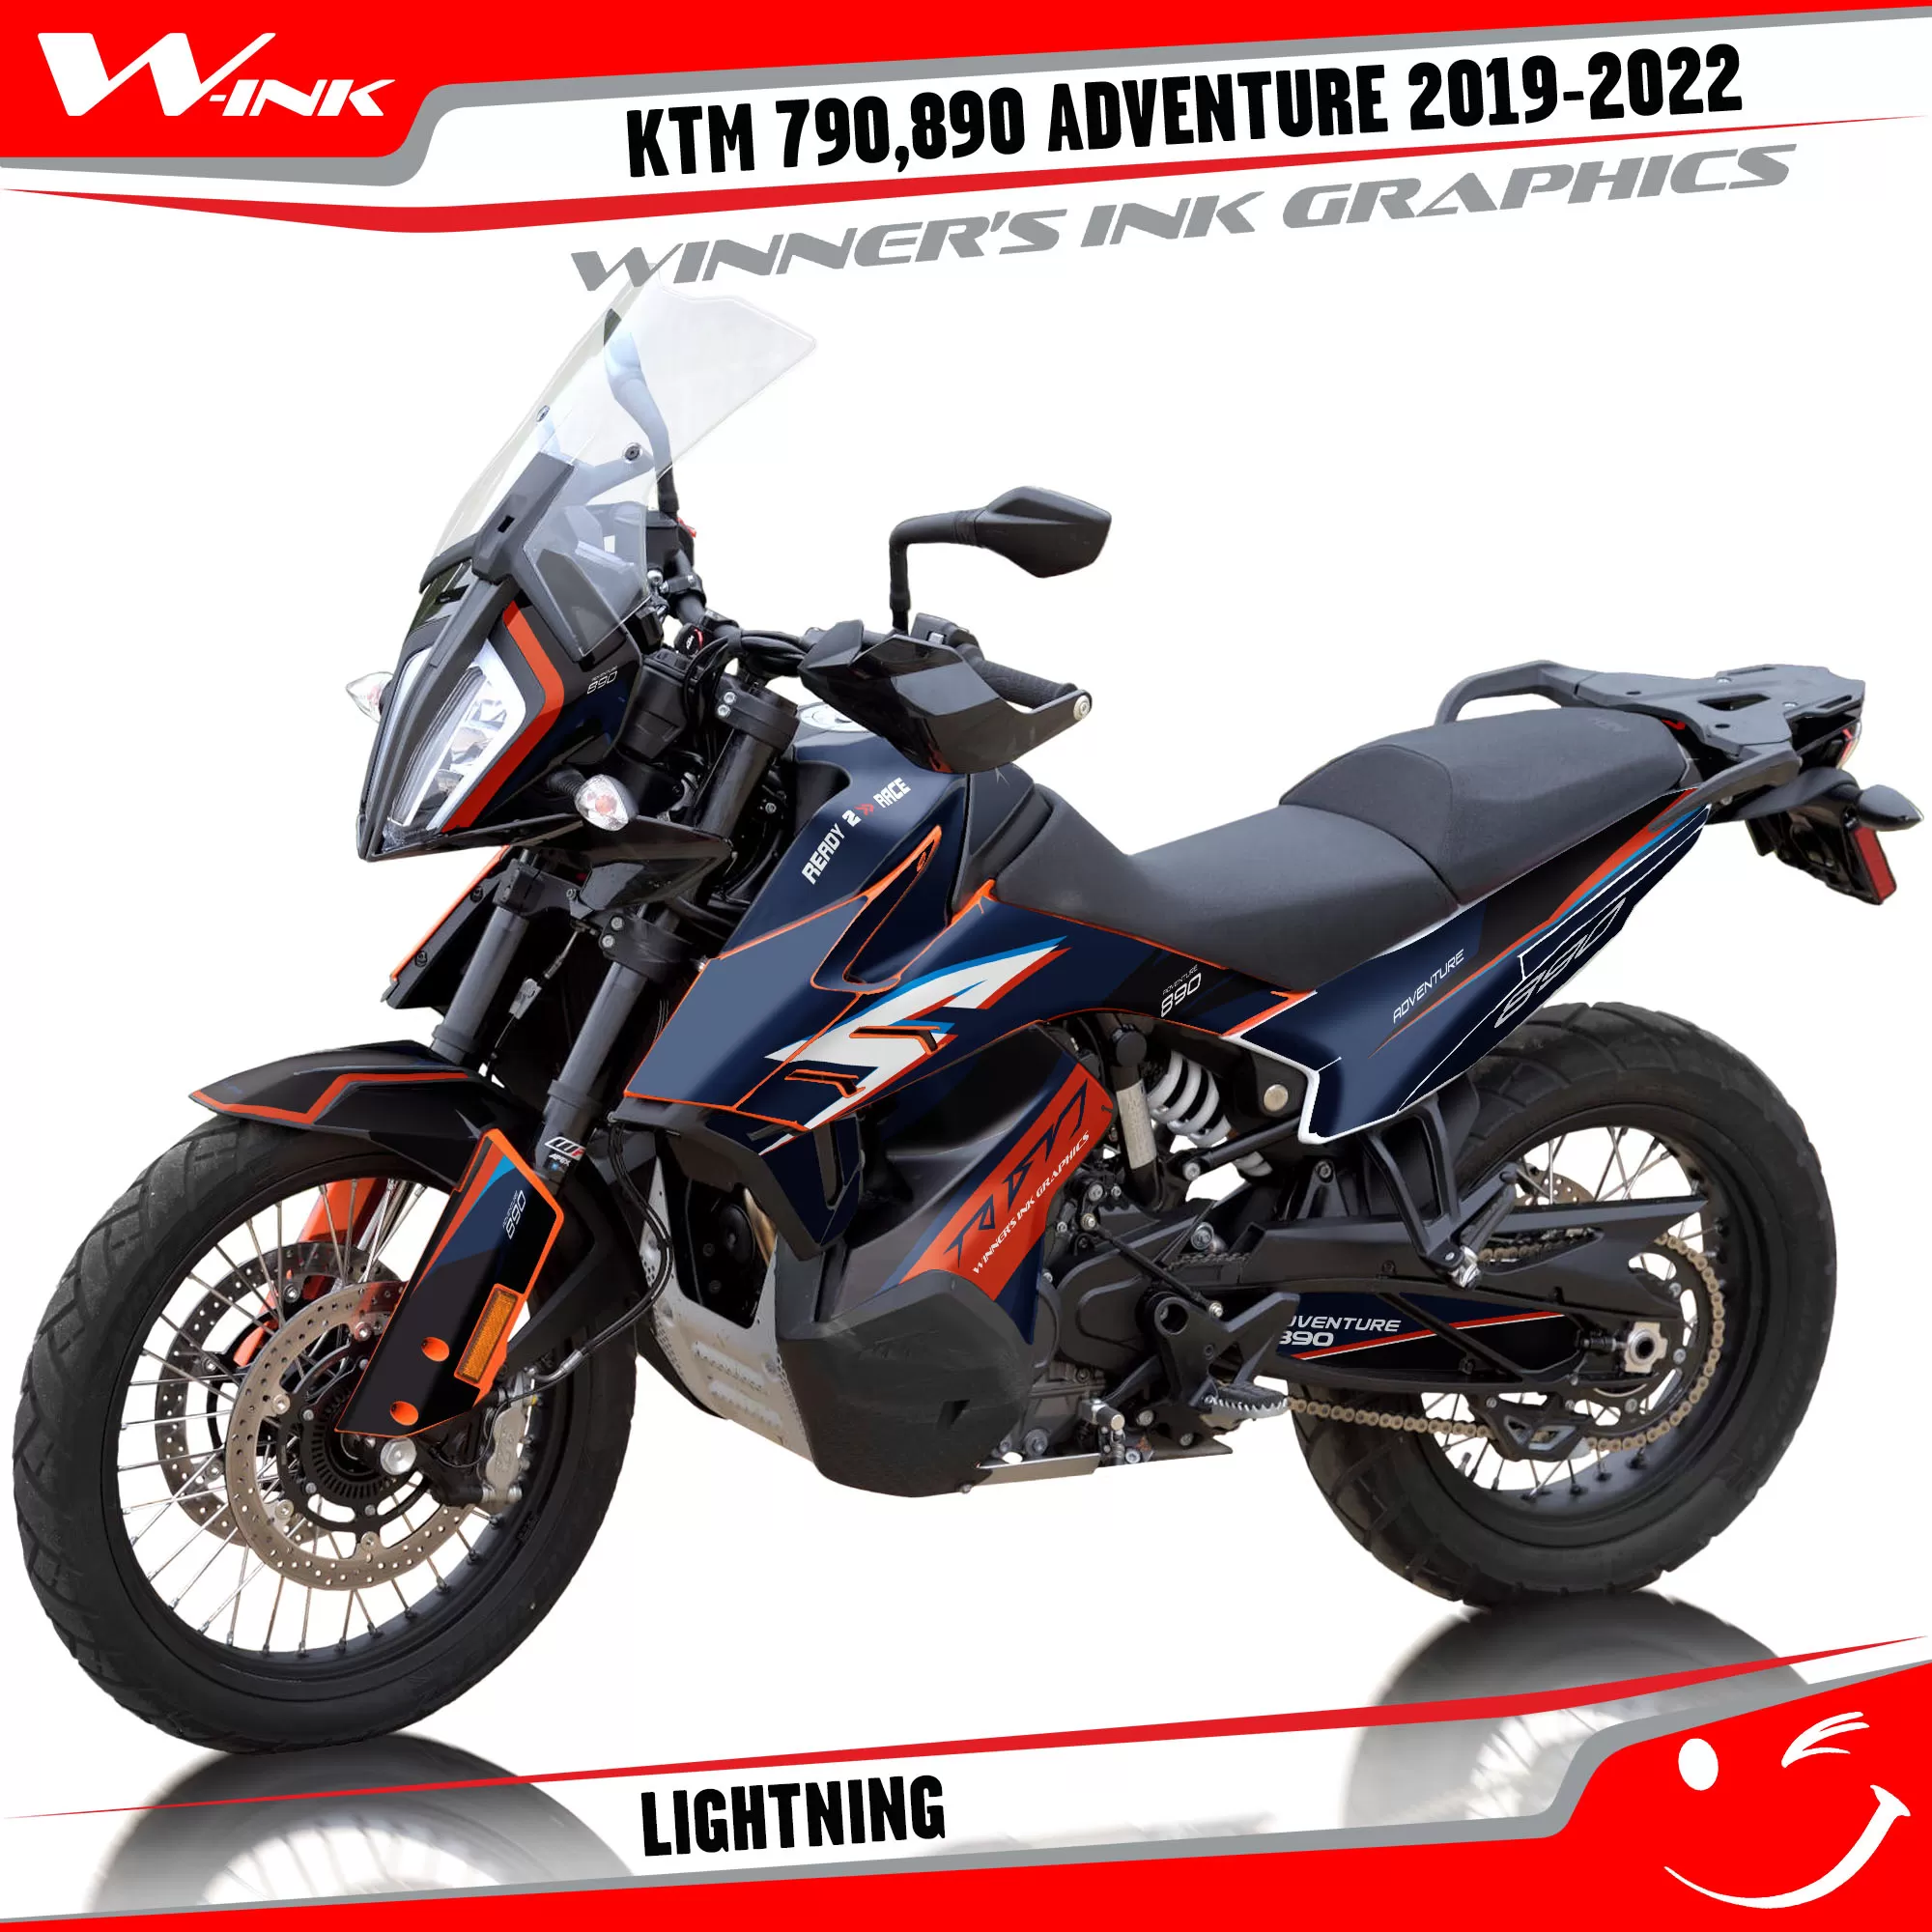 Adventure-790-890-2019-2020-2021-2022-graphics-kit-and-decals-with-designs-Lightning